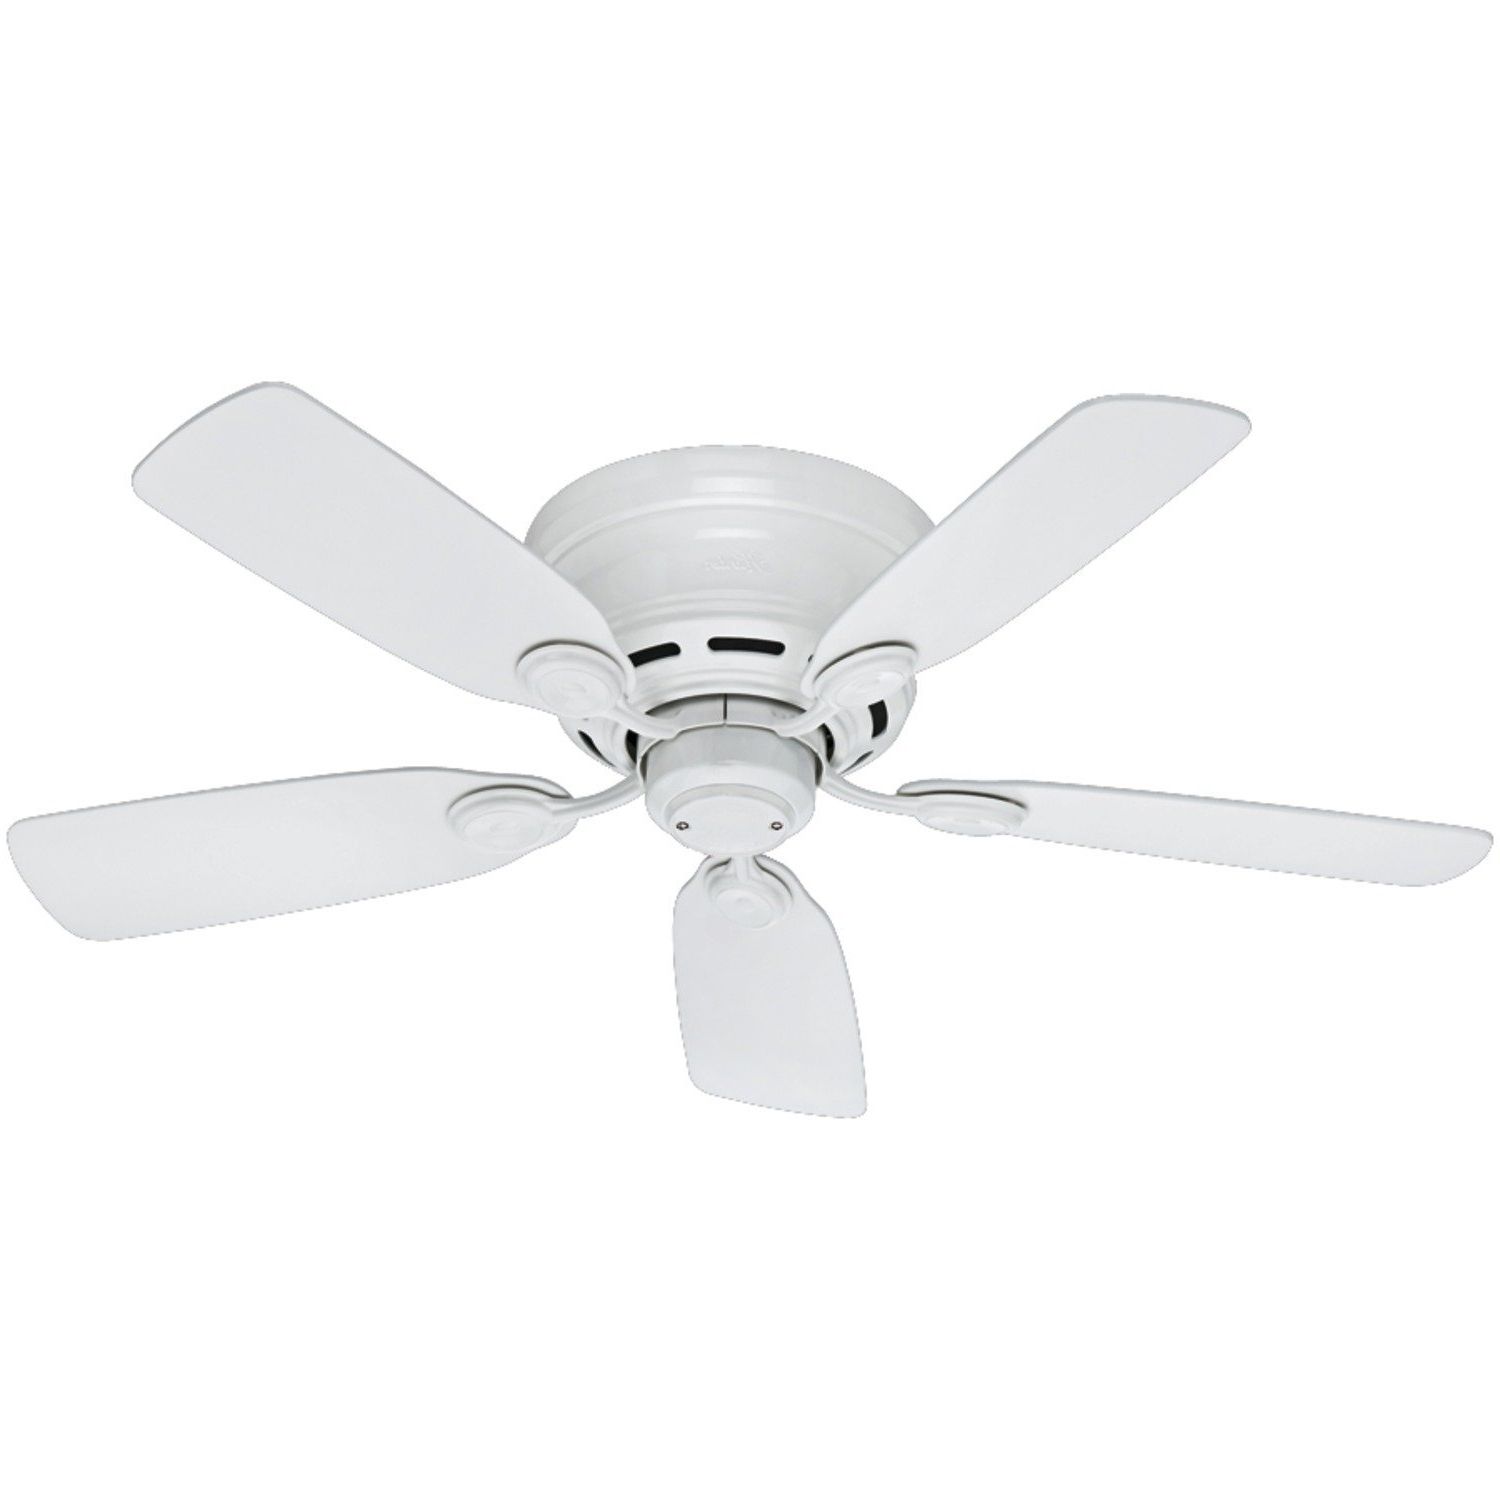 Flush Mount Ceiling Fans Review – Choose The Best With Famous 42 Inch Outdoor Ceiling Fans With Lights (View 11 of 20)